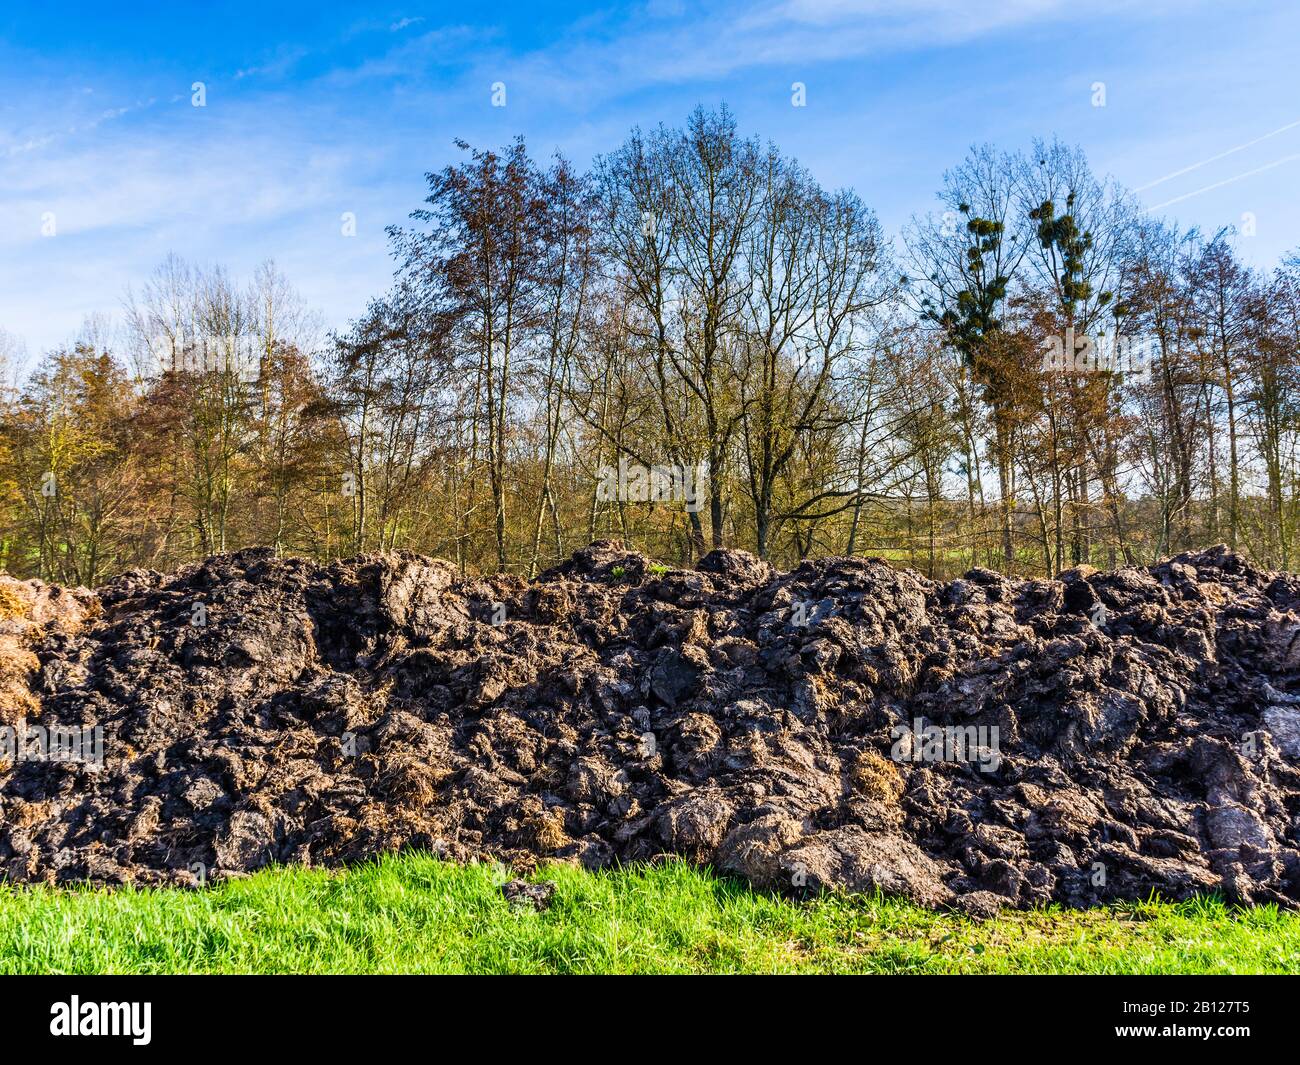 Pile of animal cattle waste for spreading on farmland - Touraine, France. Stock Photo